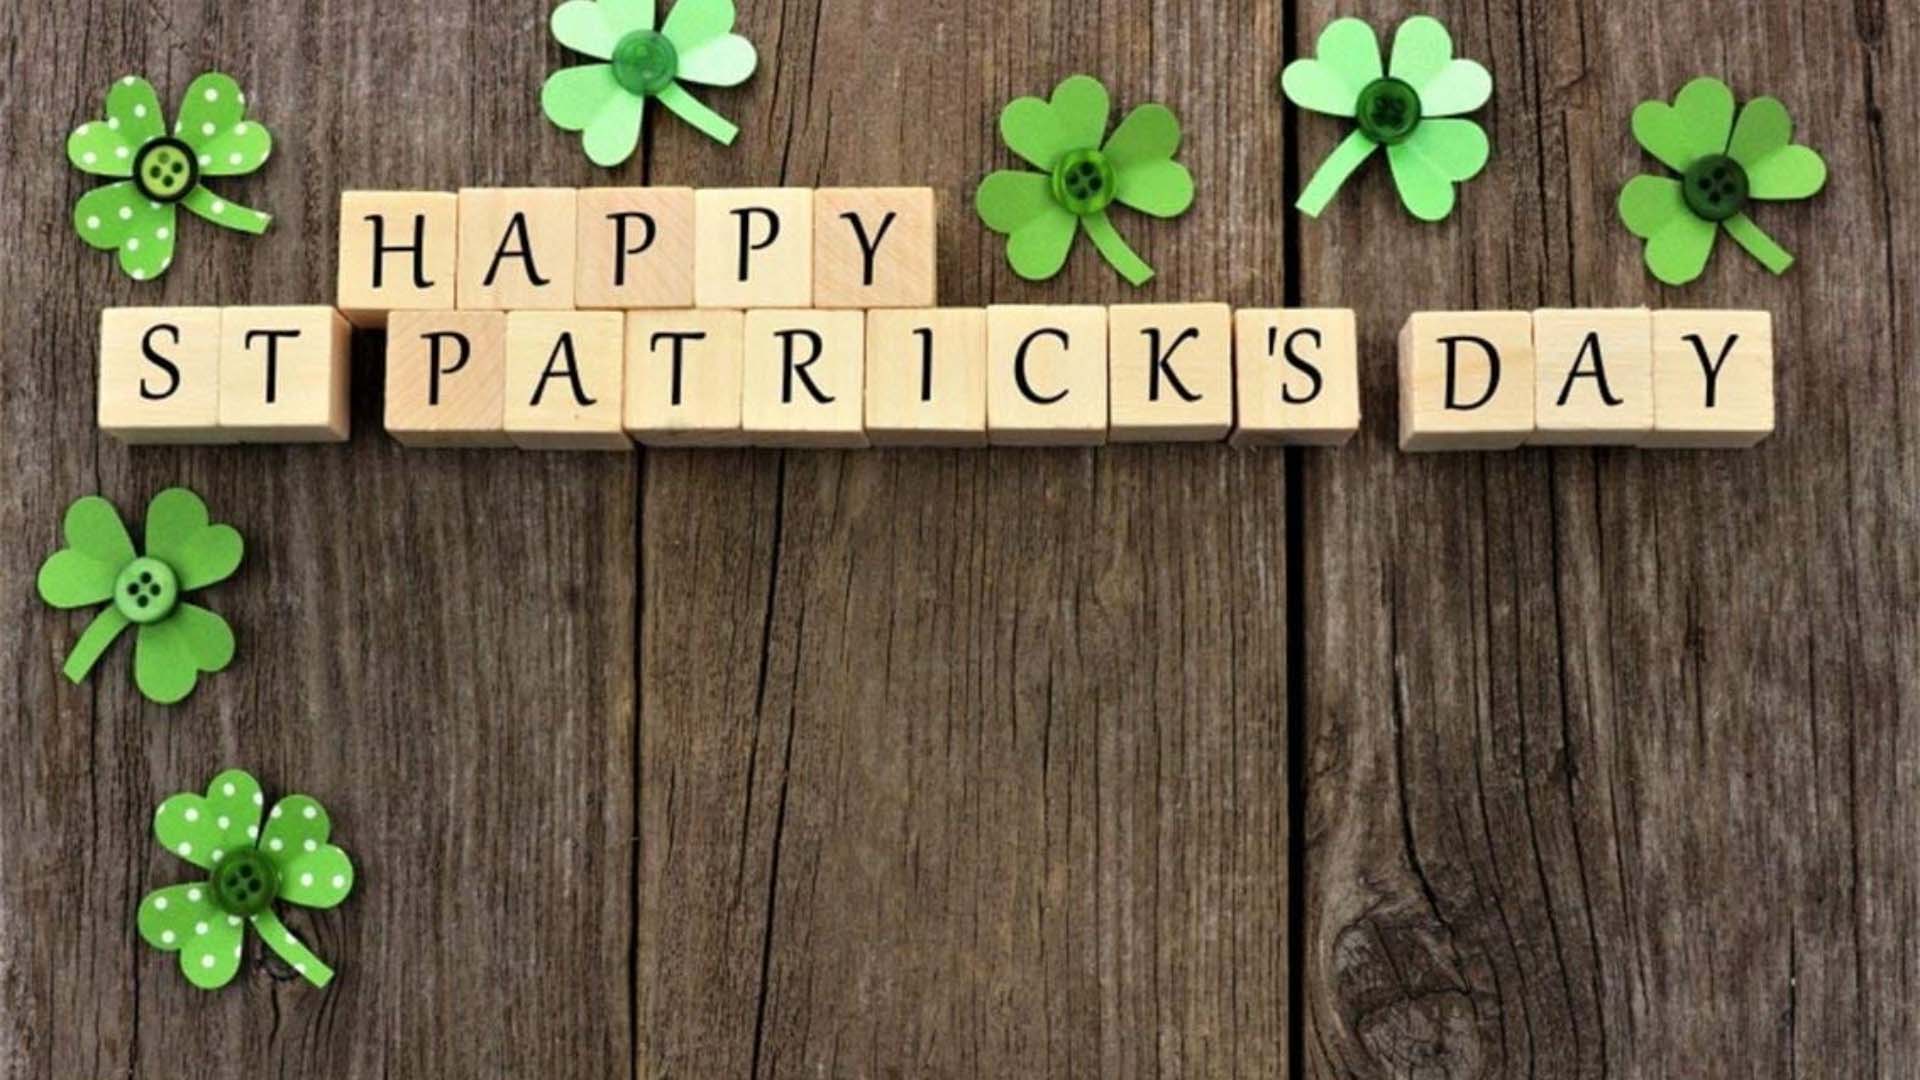 Wooded background with lighter toned wooden block spelling out Happy St Patrick's Day. Seven cut out paper shamrock aligning the left and top of the graphic with buttons in the middle of the shamrock